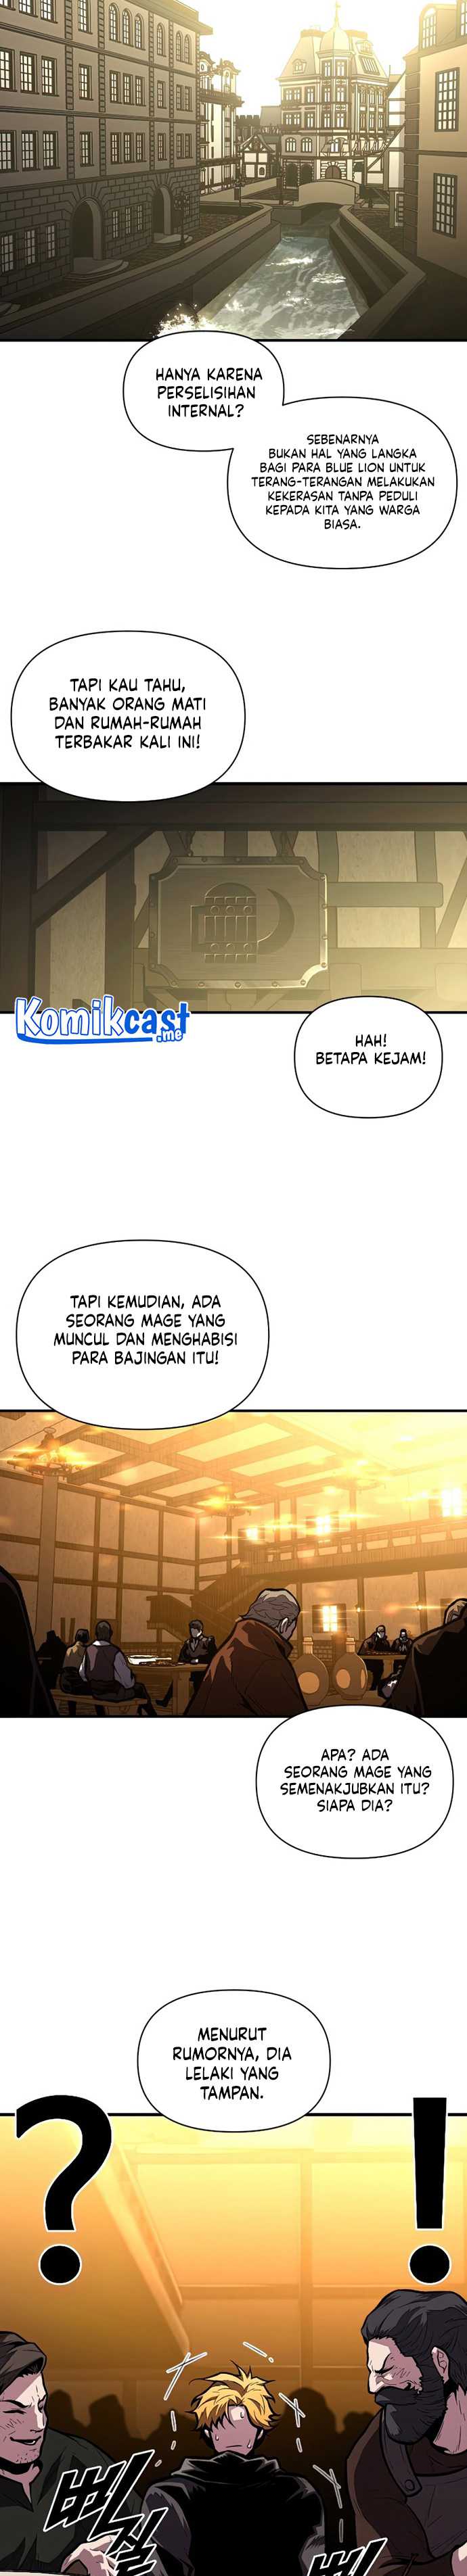 Talent-Swallowing Magician Chapter 35